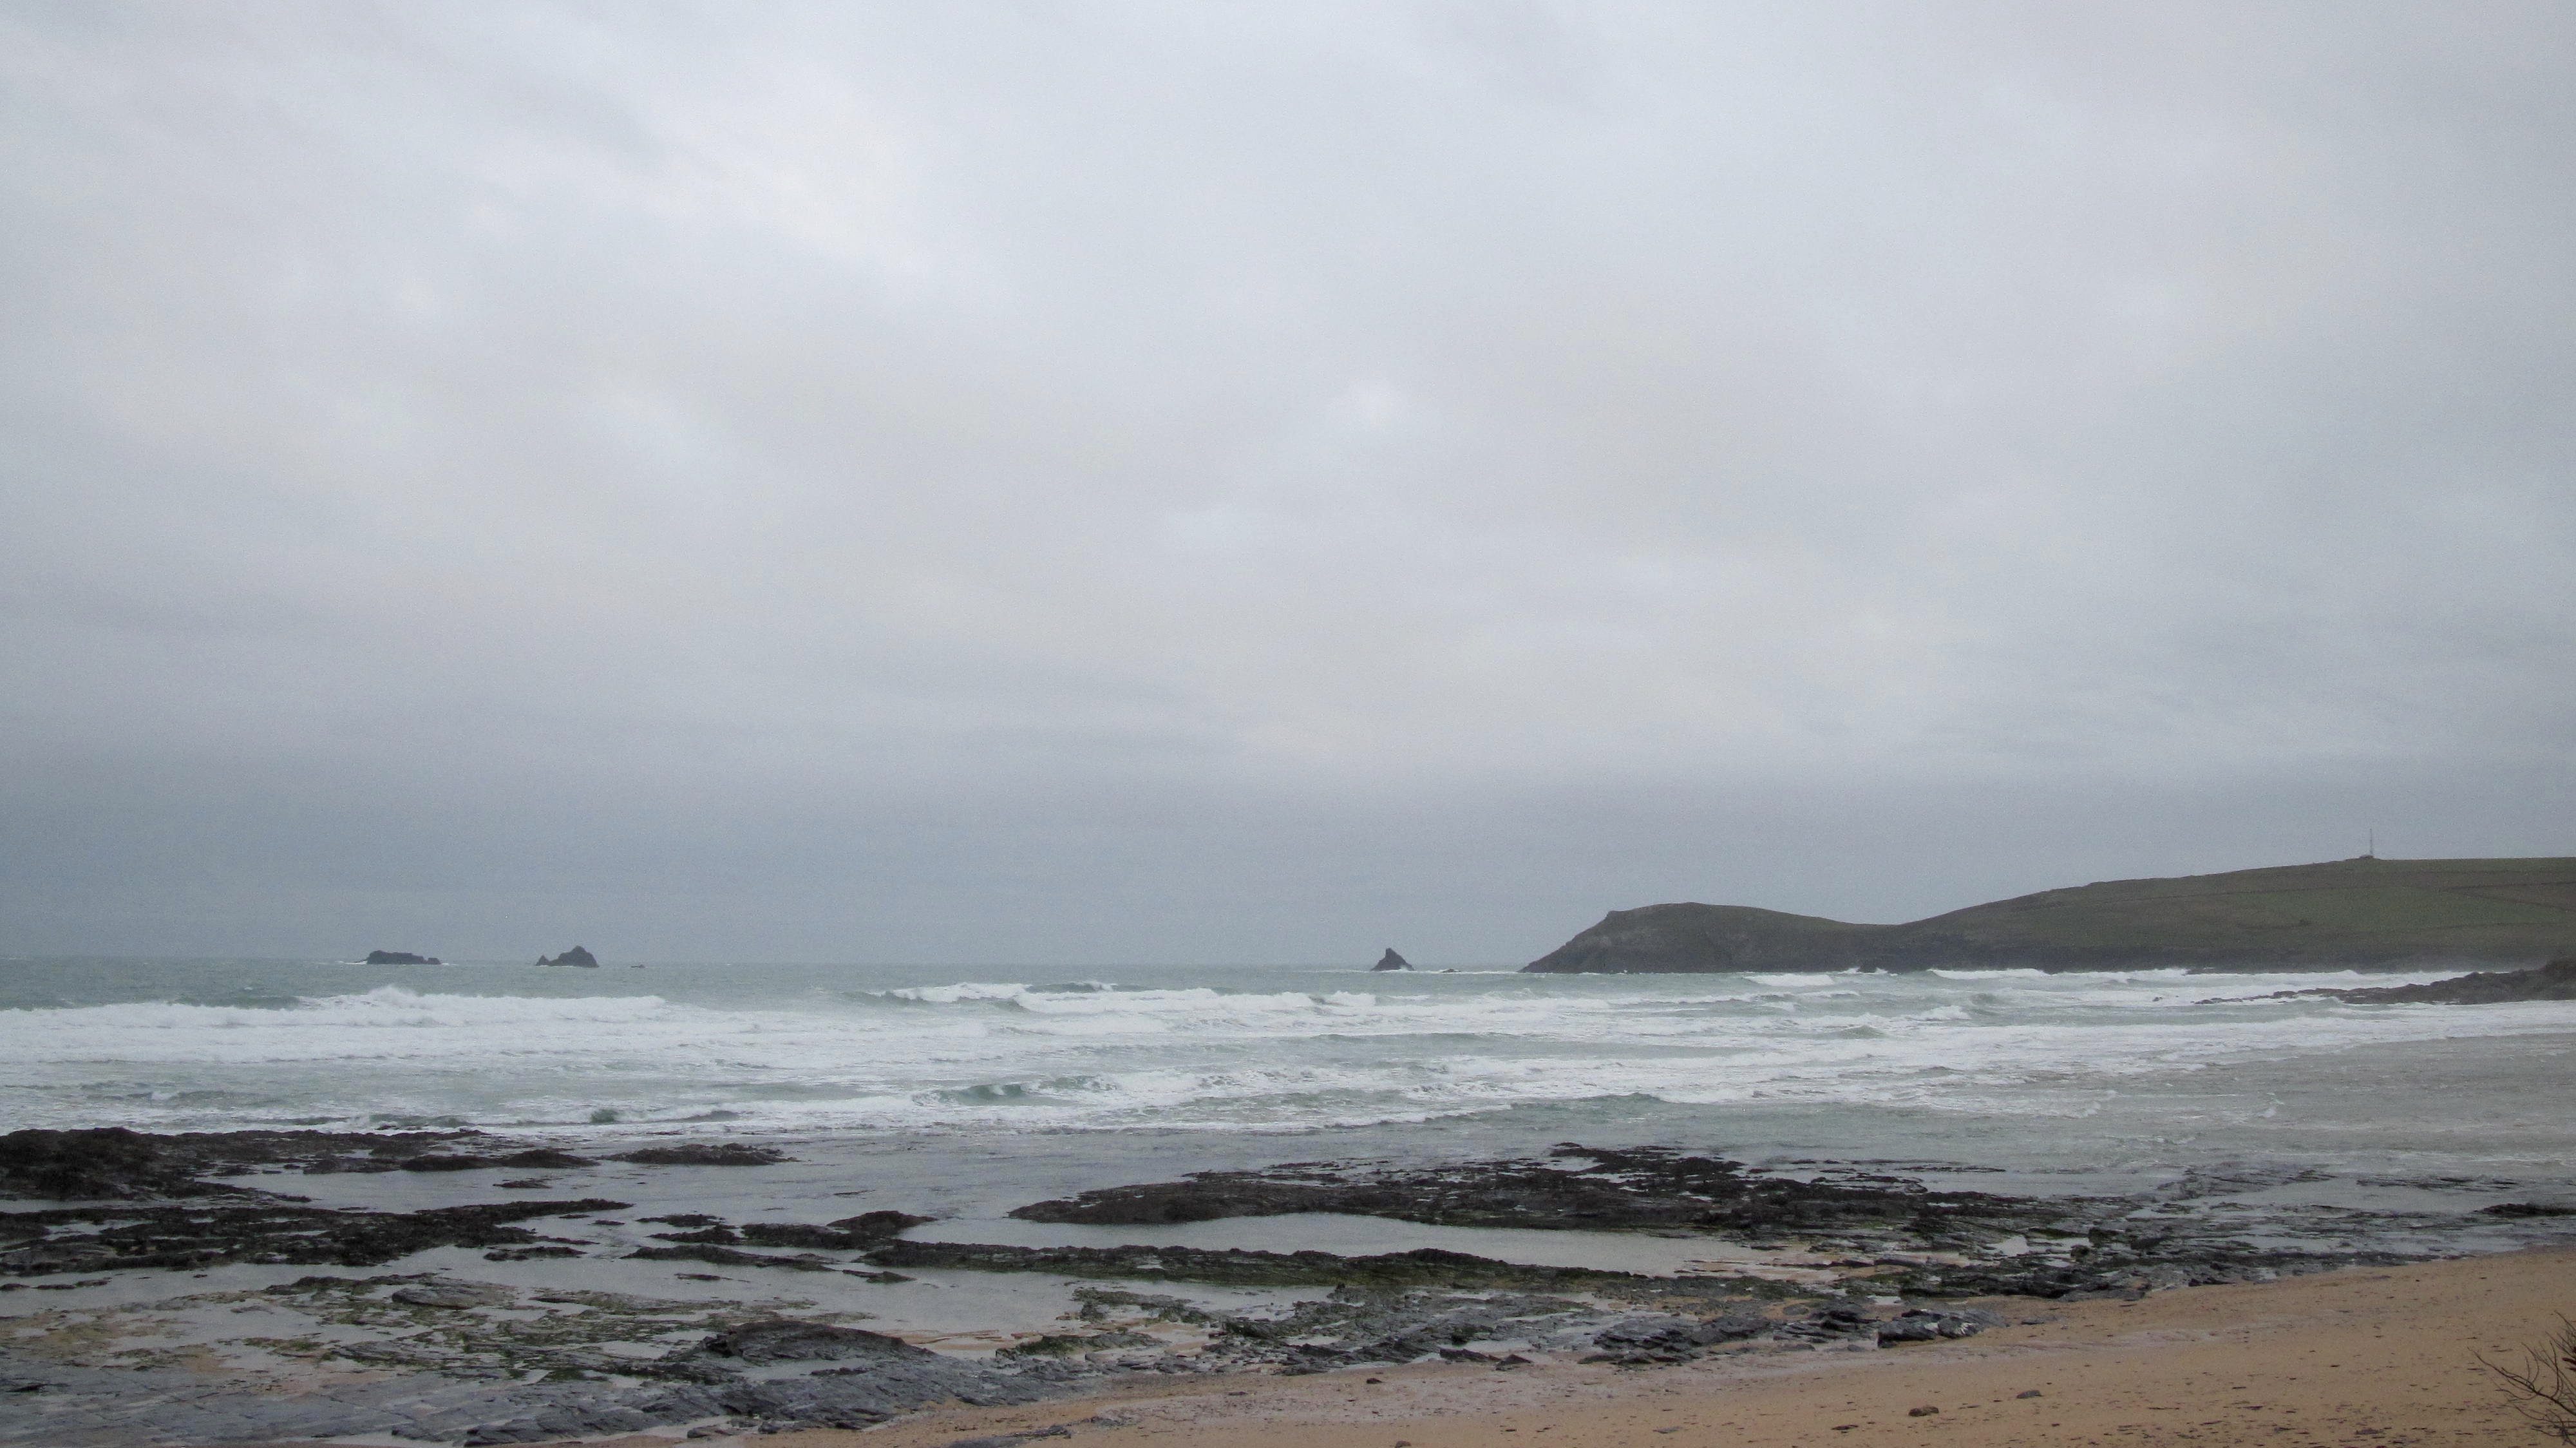 Surf Report for Armistice Day, Wednesday 11th November 2015